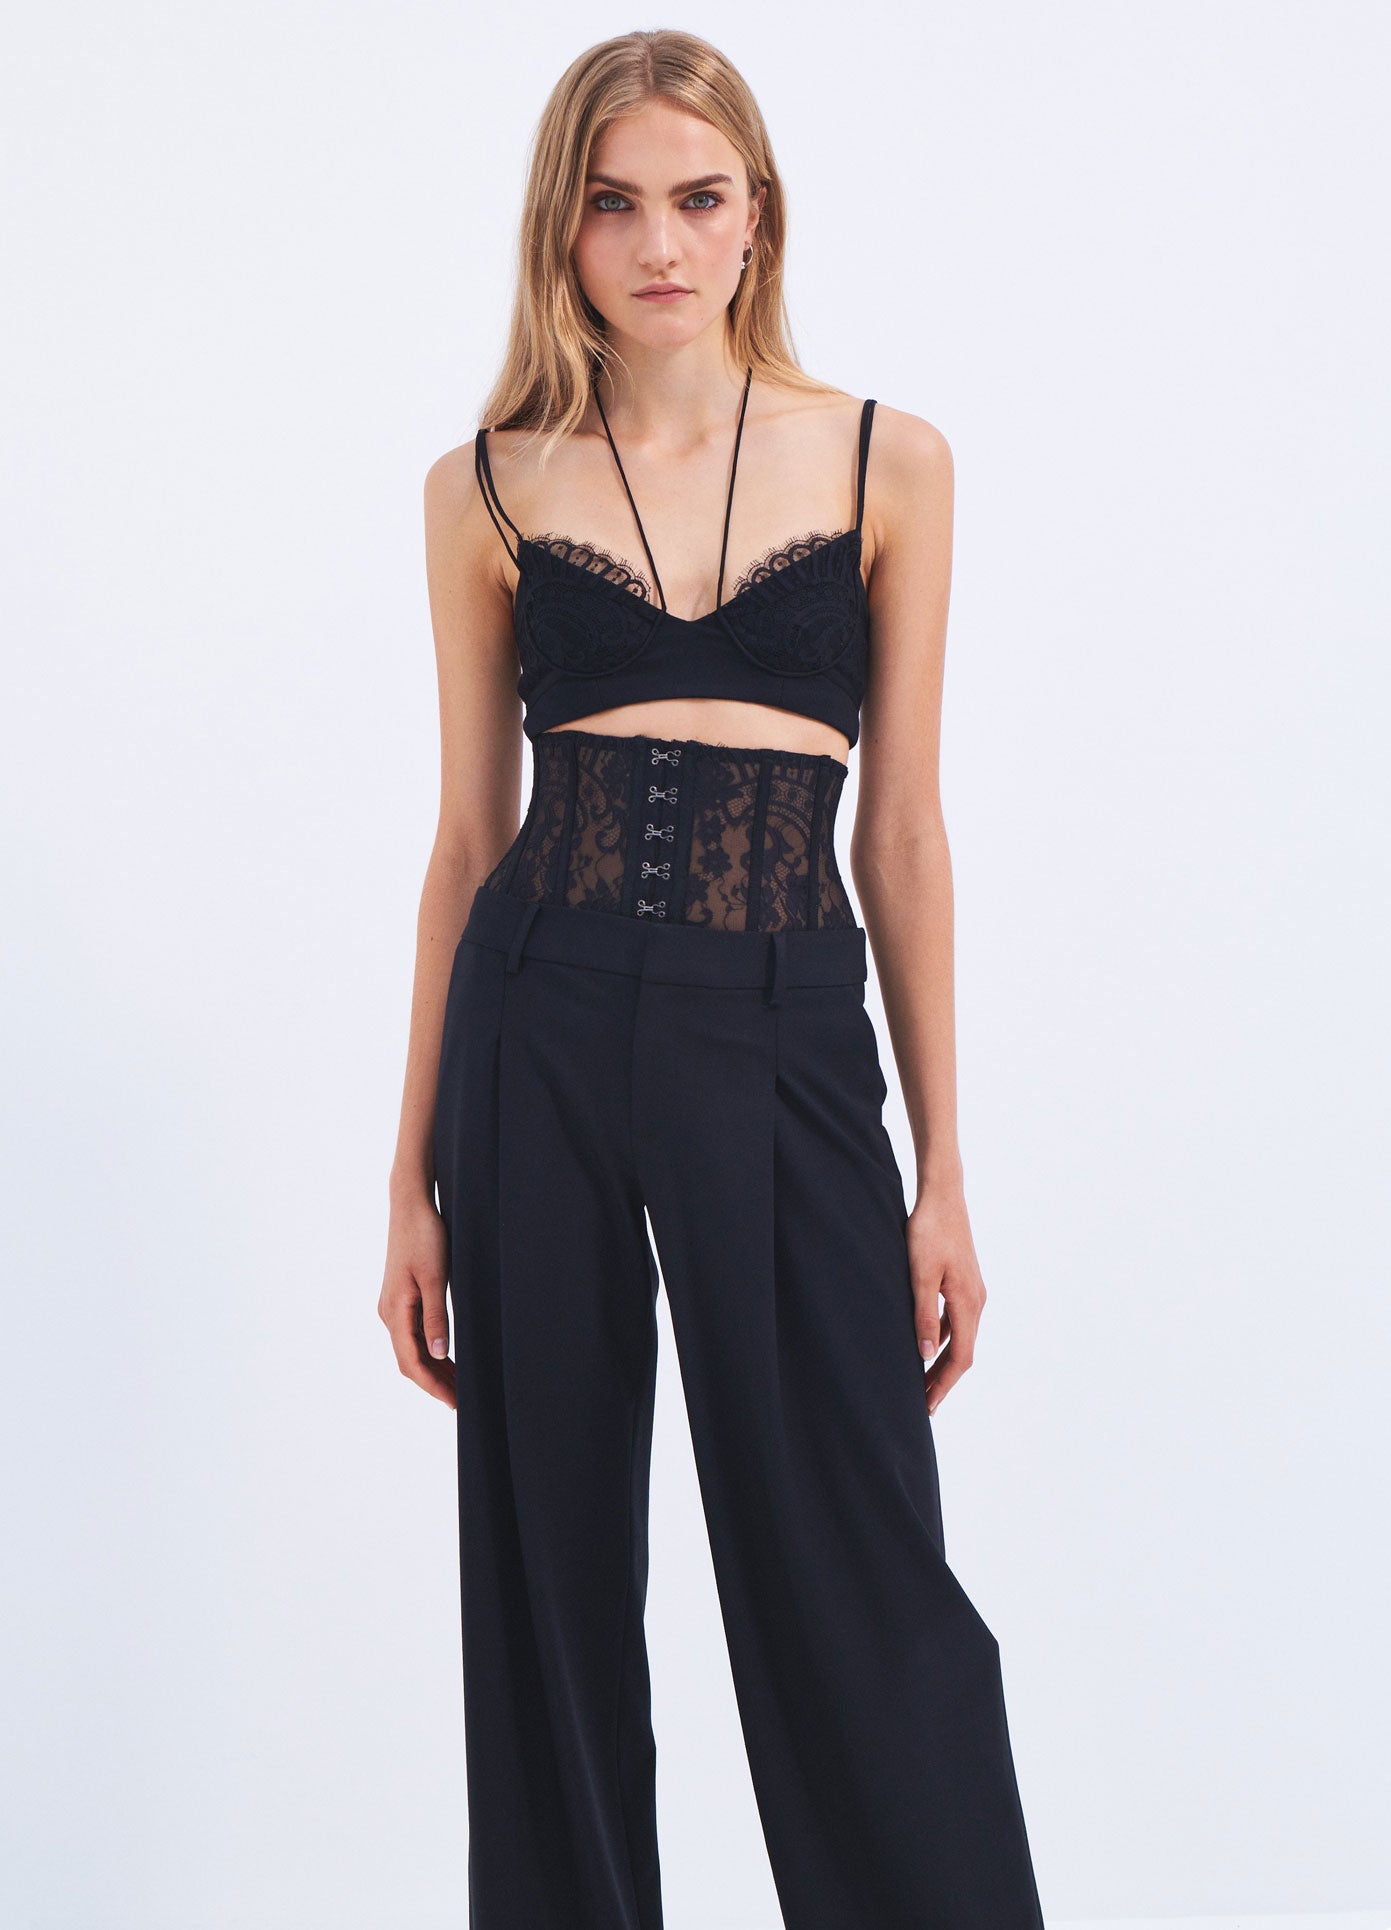 MONSE Spring 2024 Lace Tie Strap Bralette in Black on model full front view